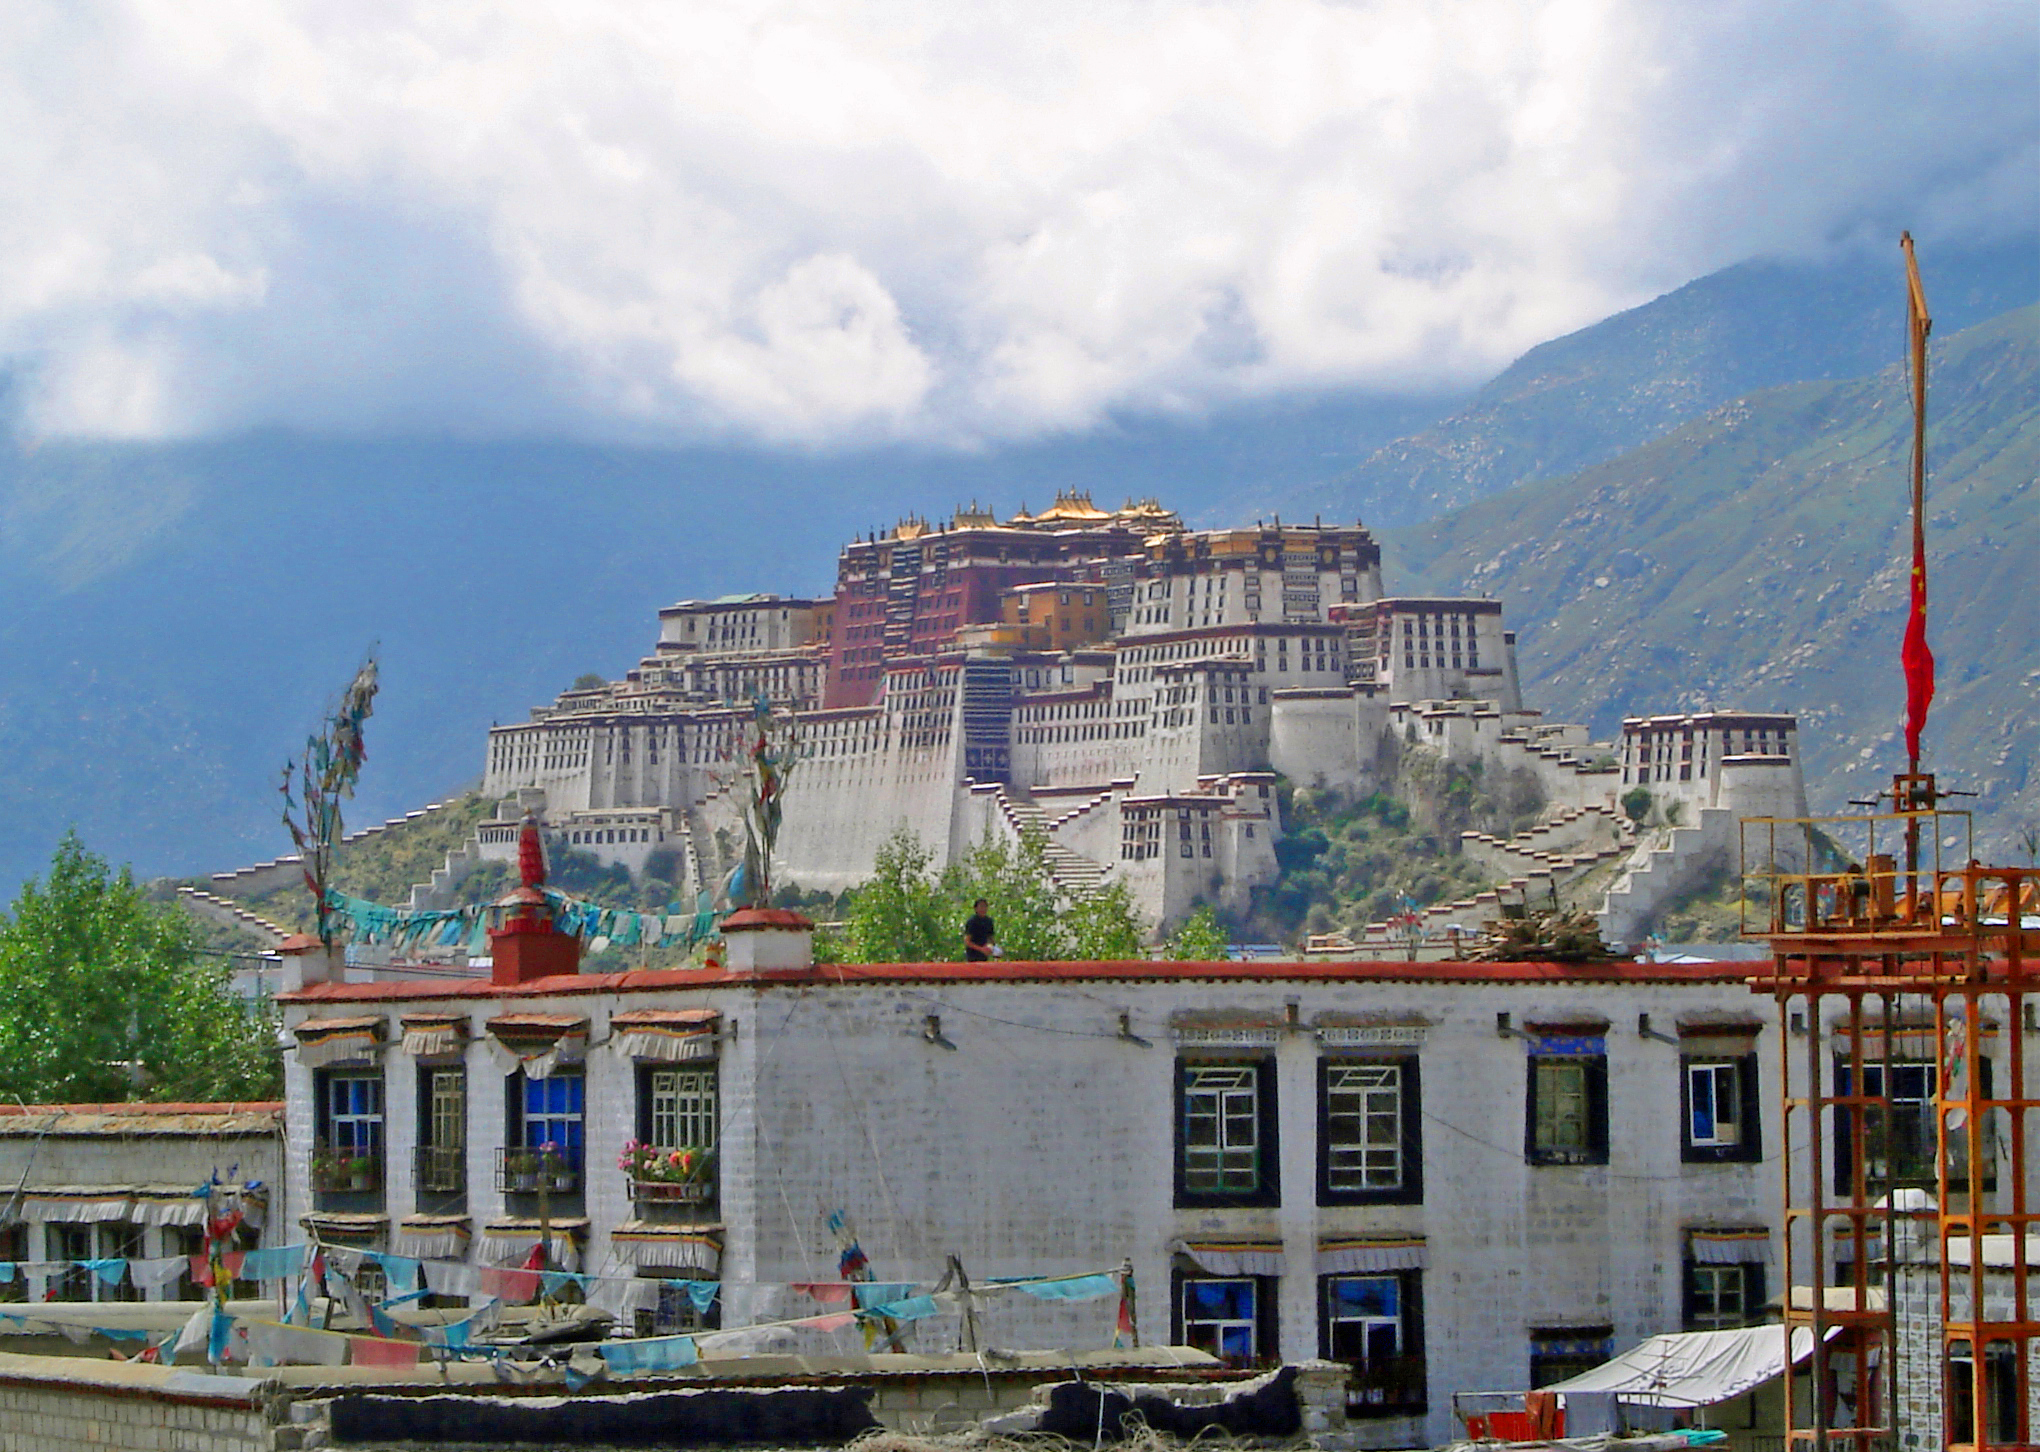 Potala Palace over the rooftops